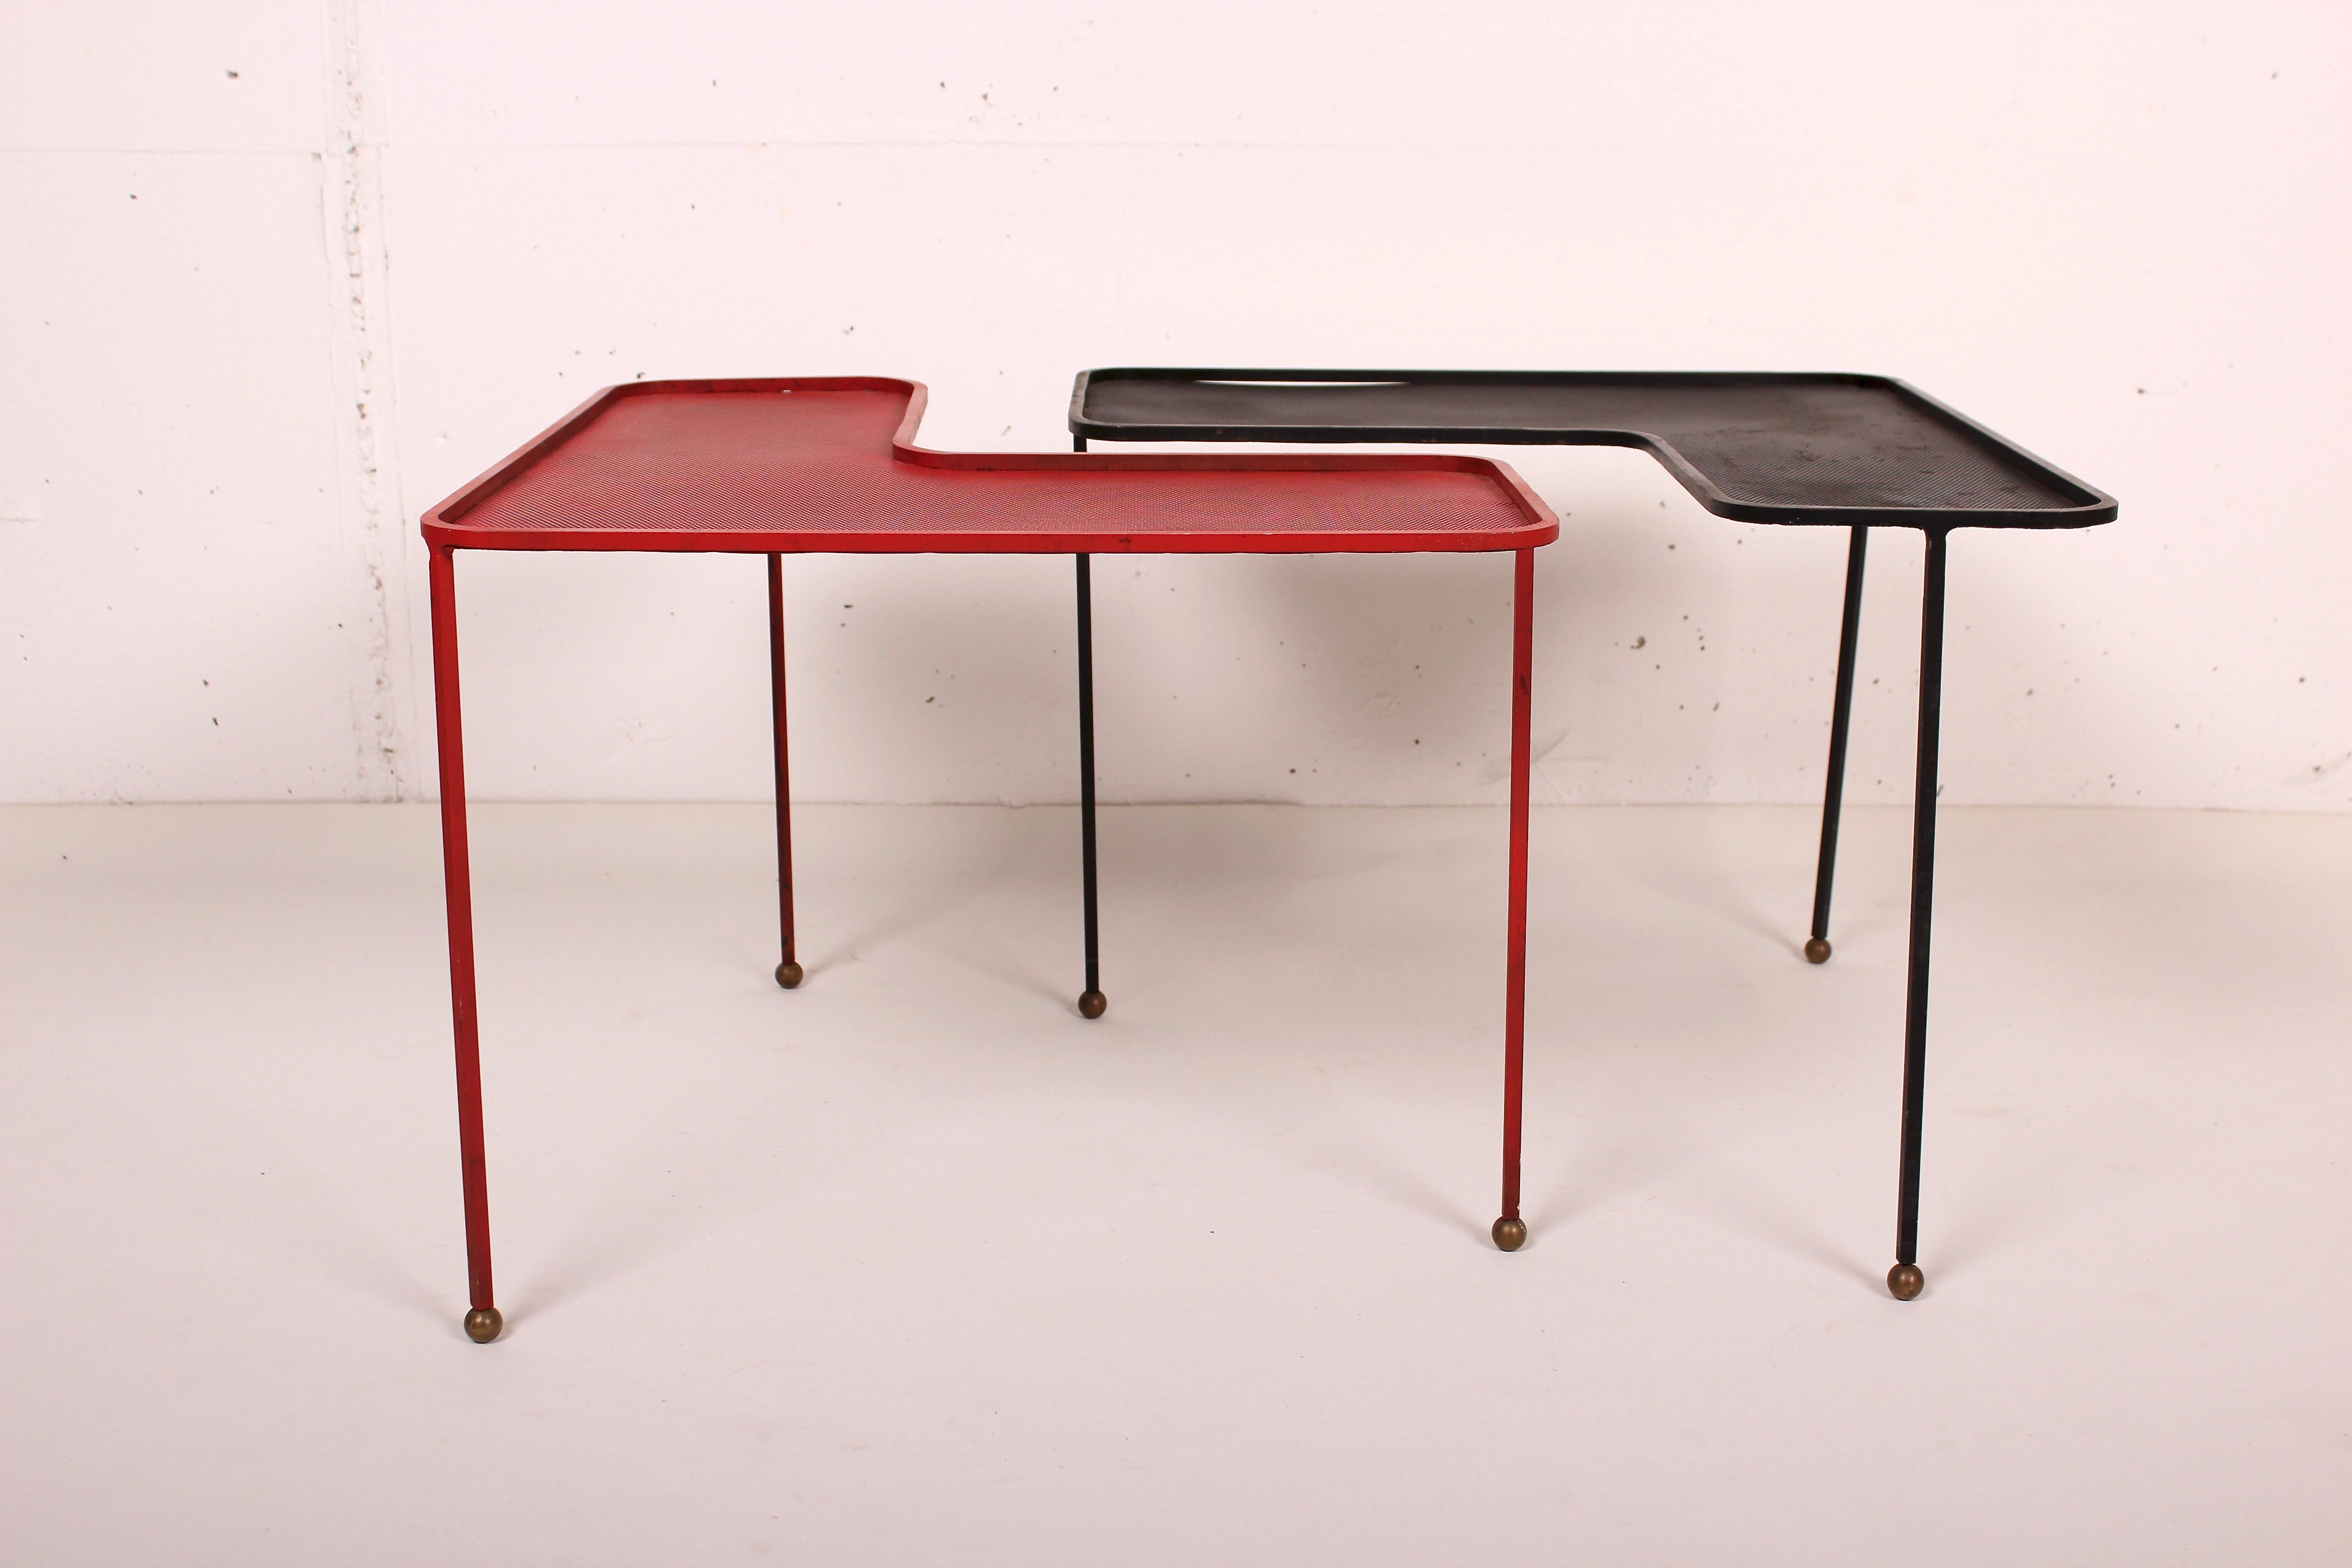 Pair of Domino coffee tables by Mathieu Matégot, black and red lacquered perforated metal and brass.